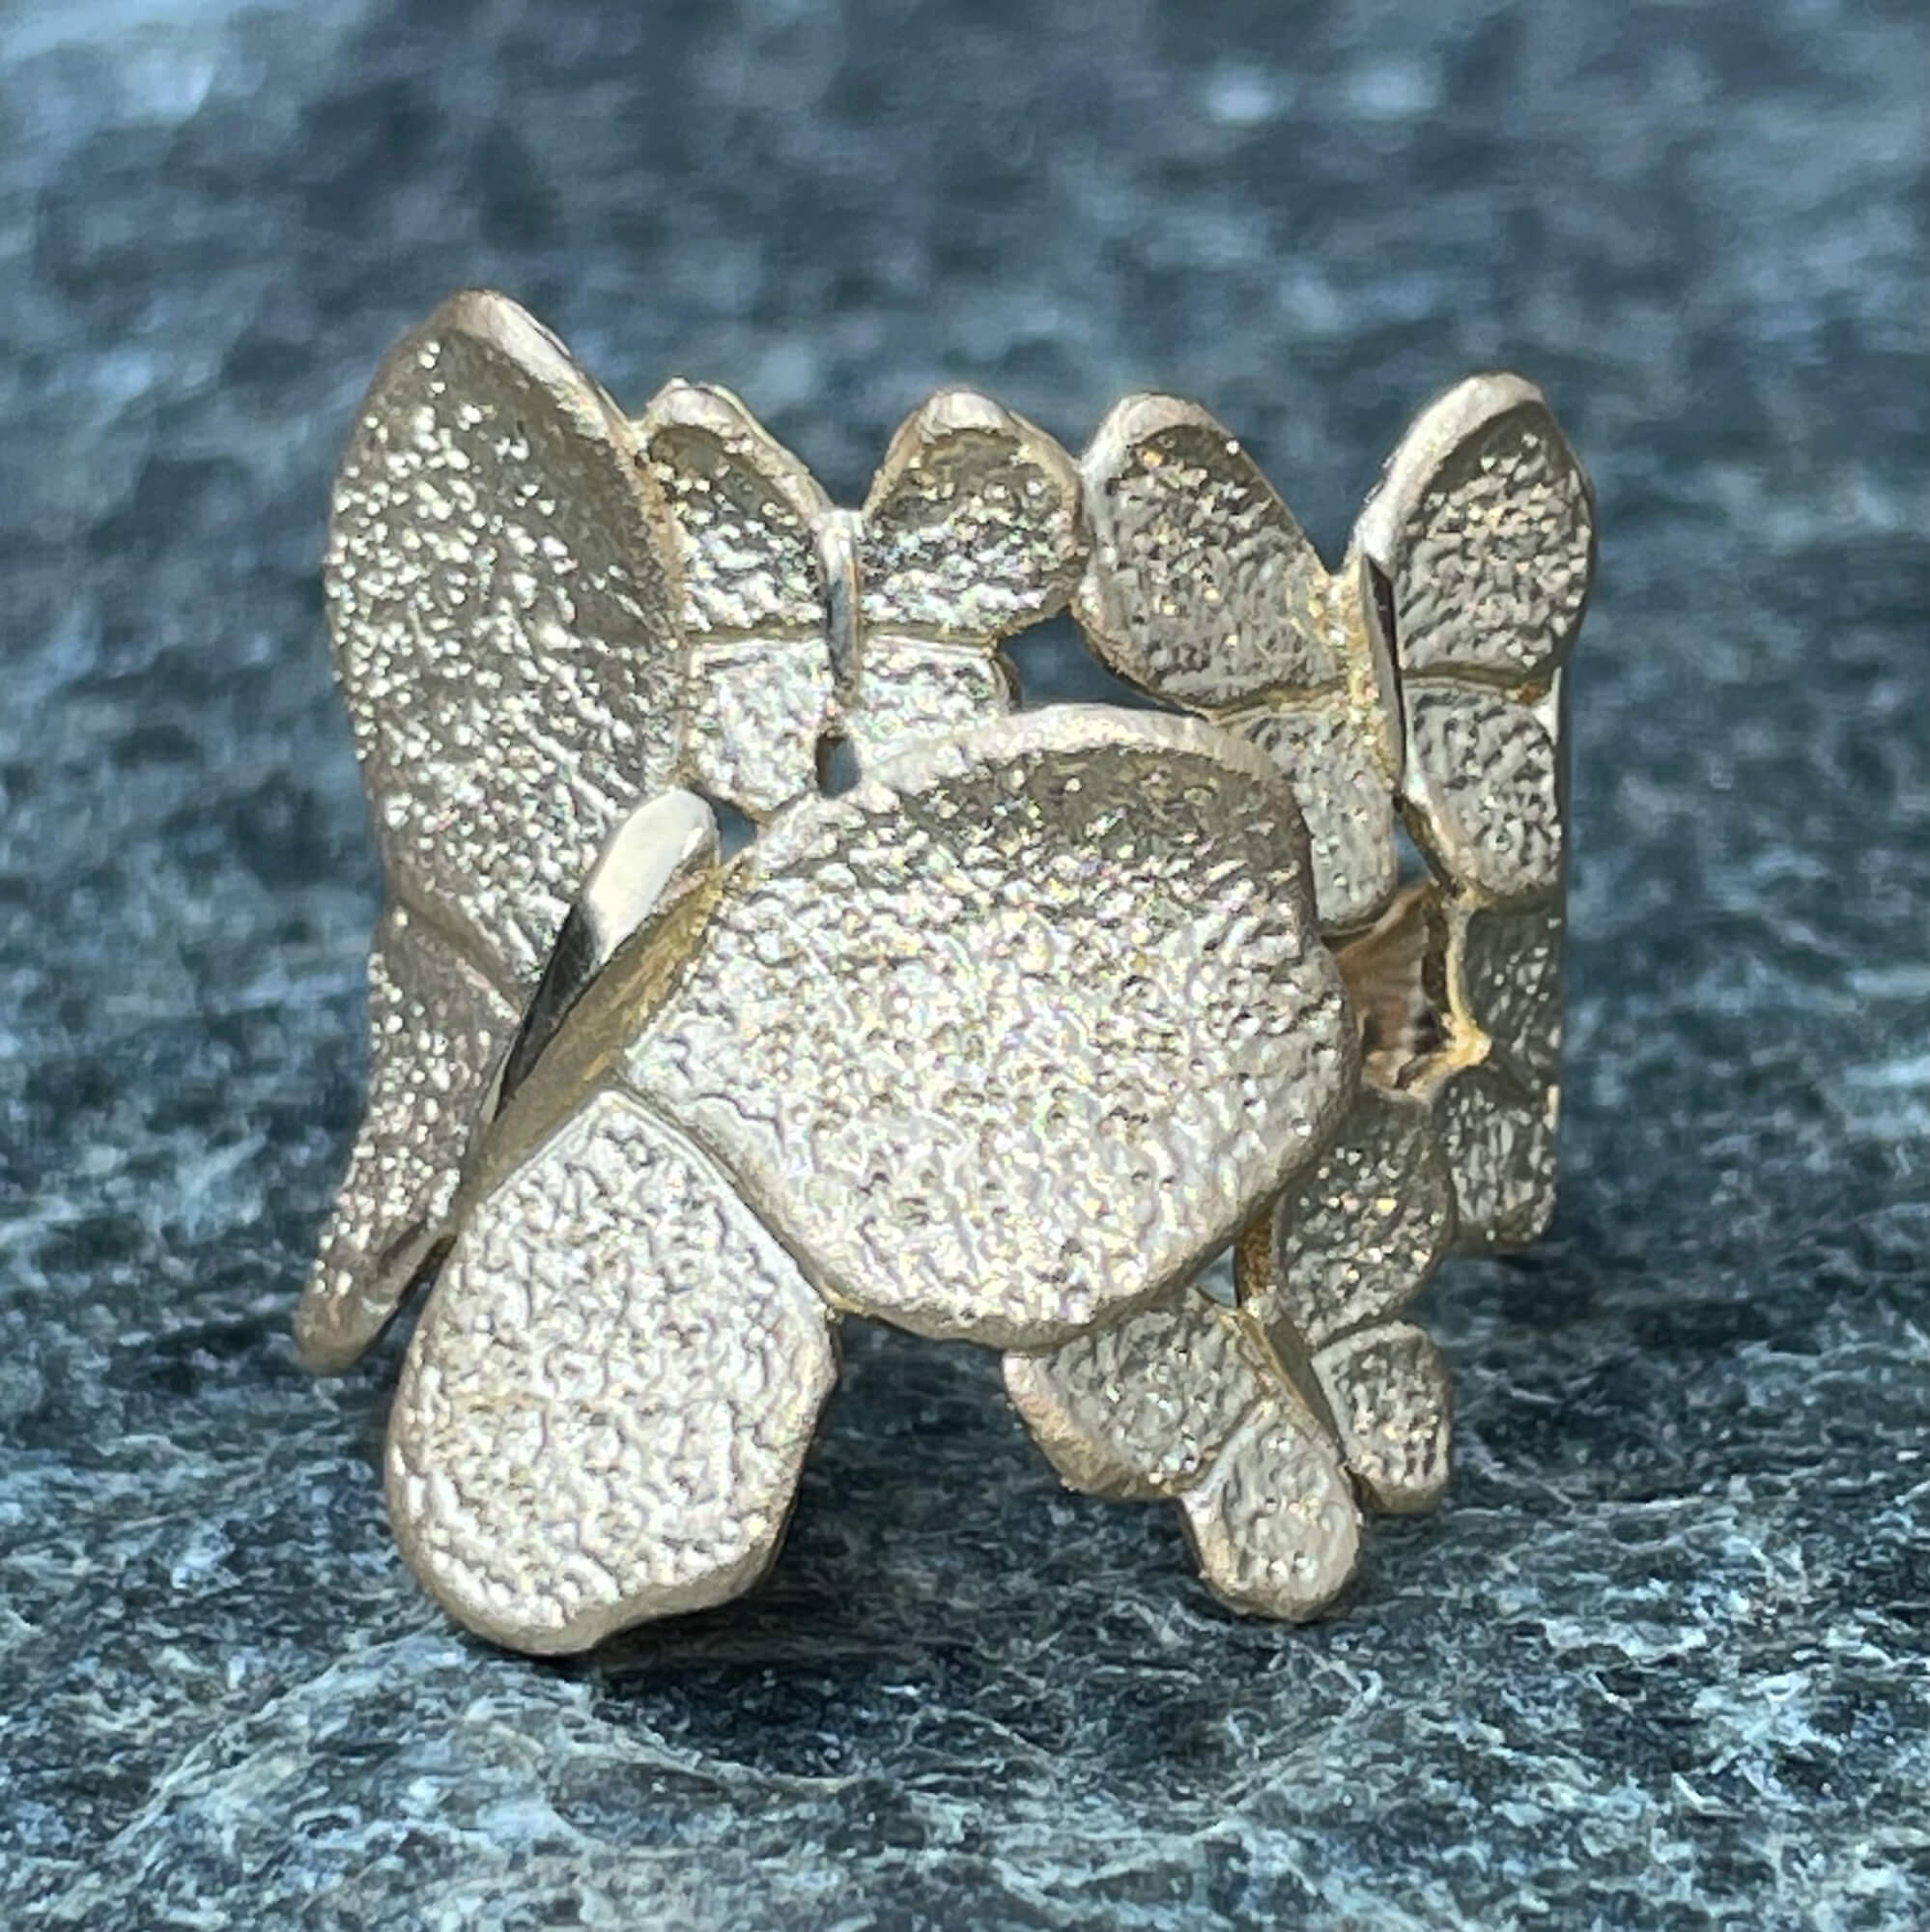 Smaller gold plated butterfly ring